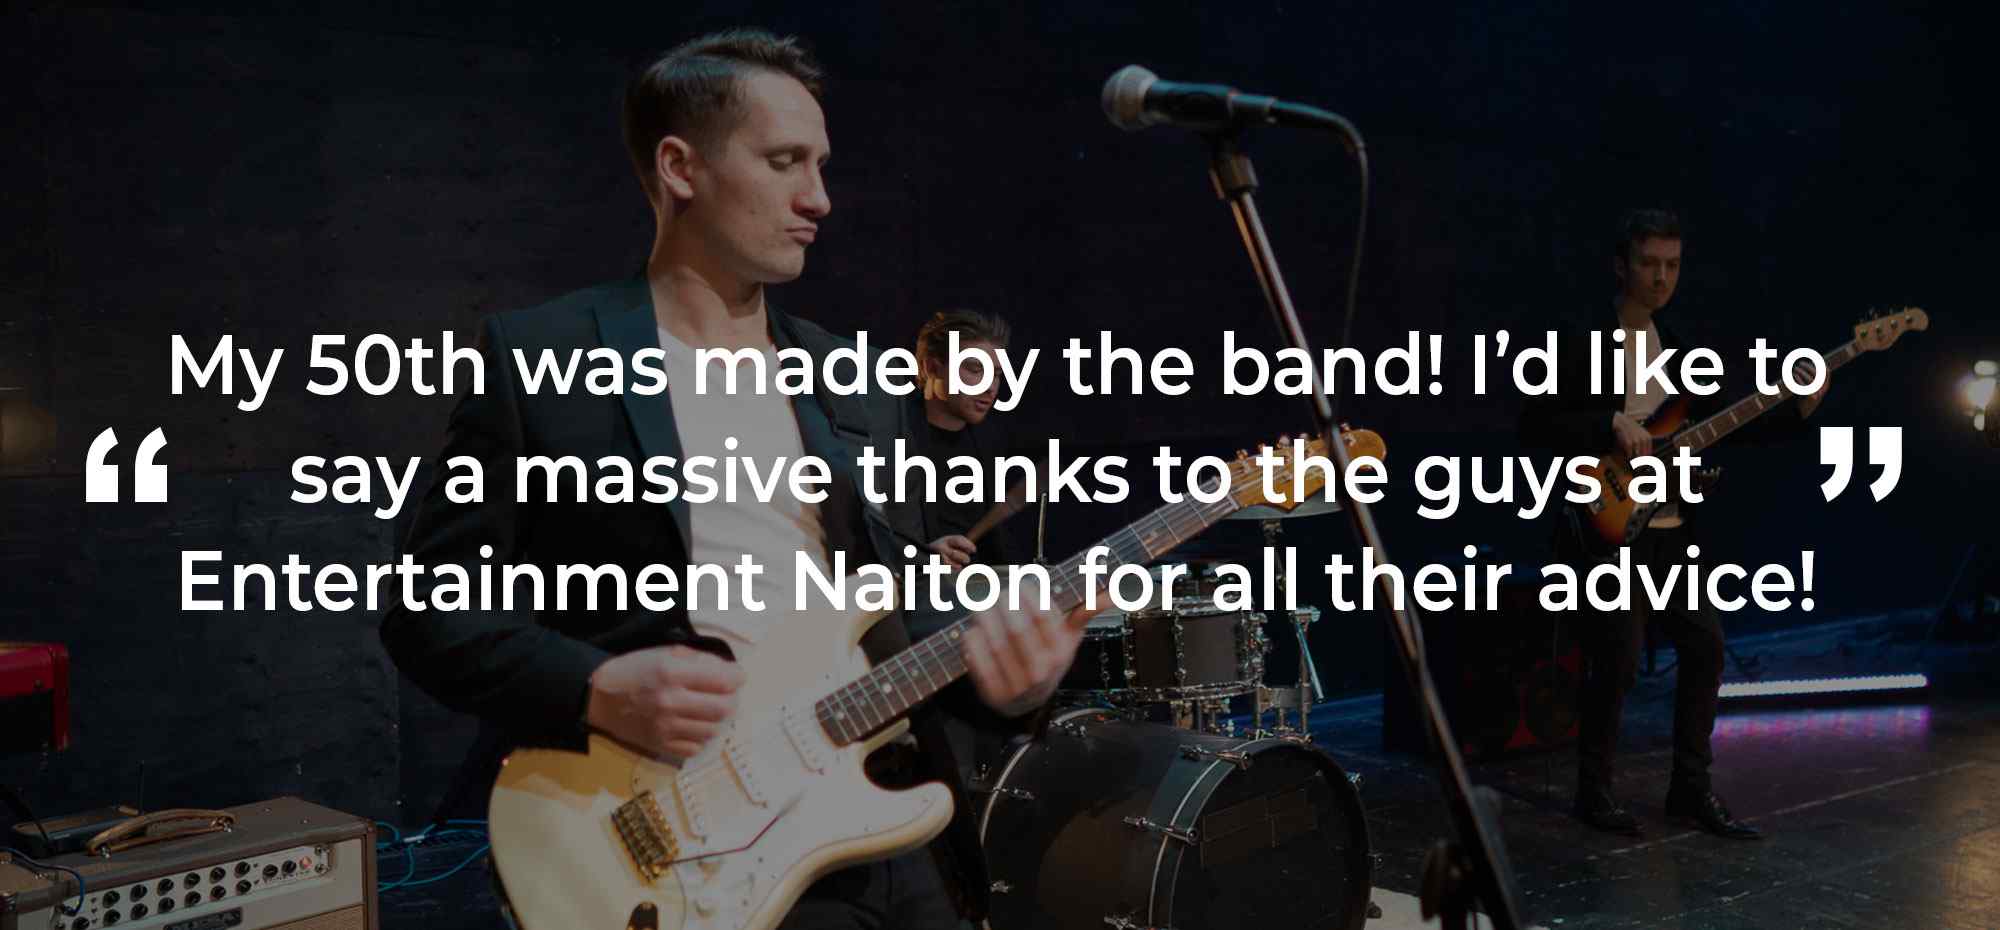 Client Review of a Party Band Bedfordshire